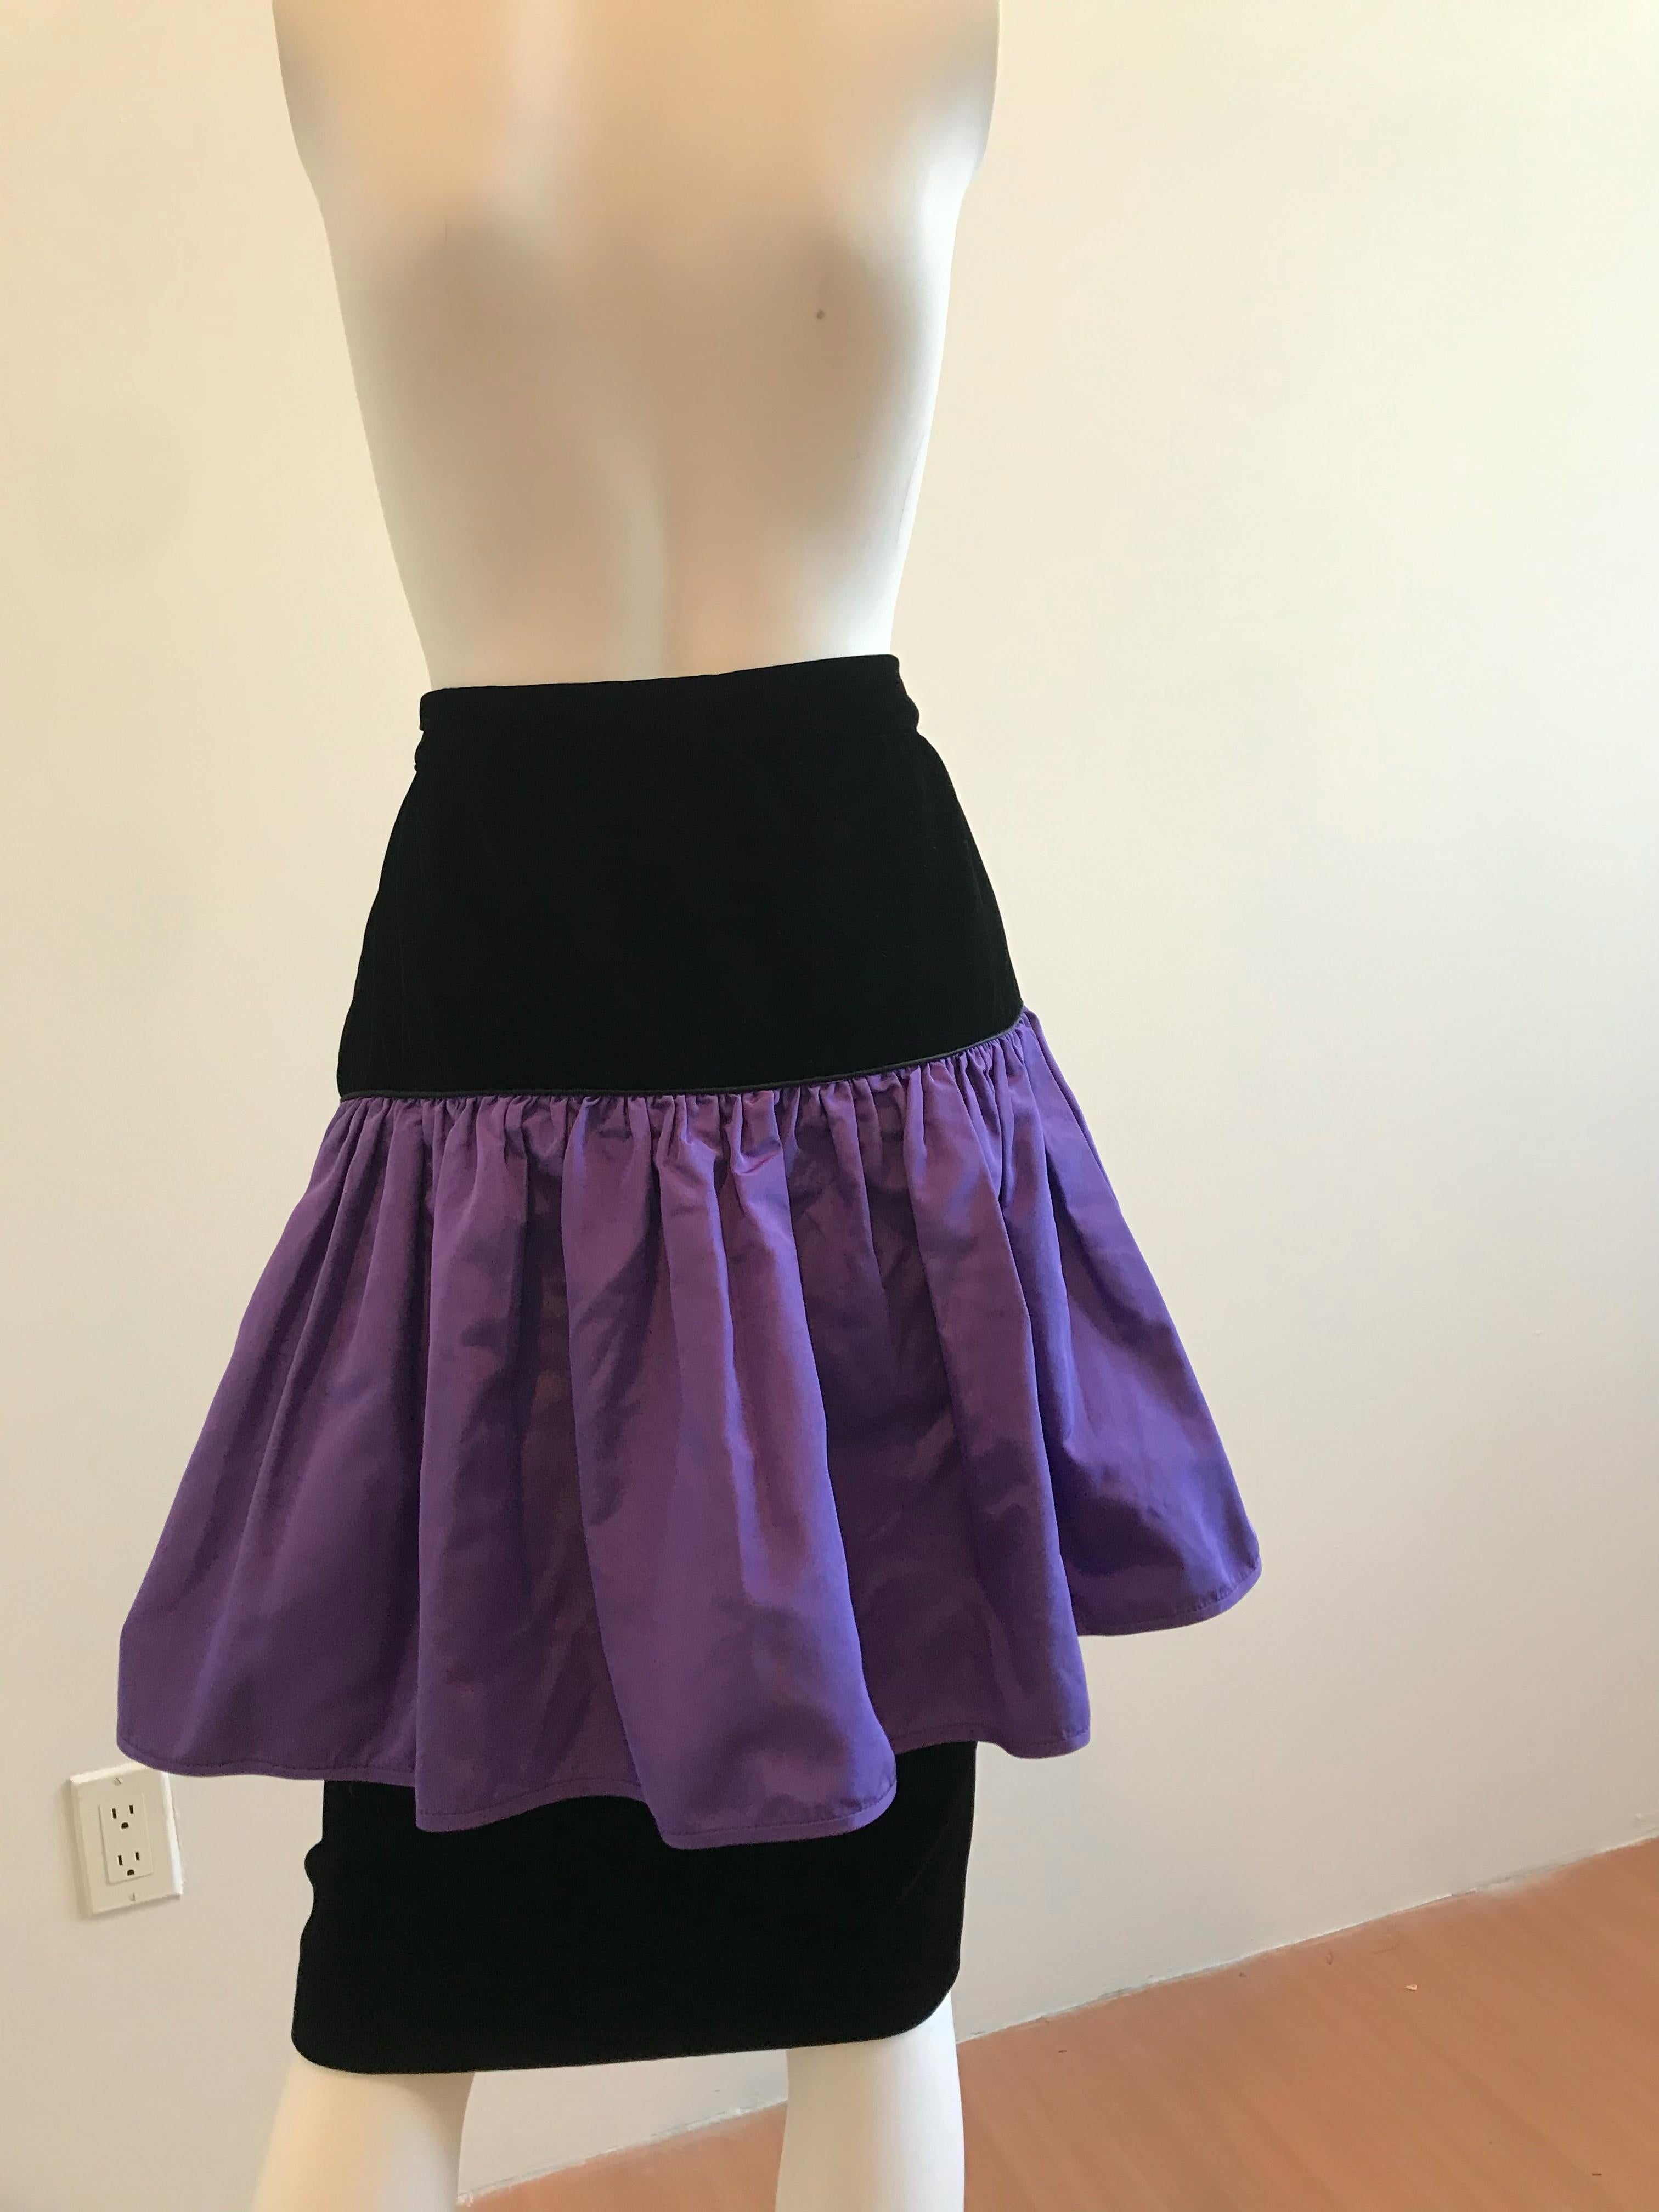 Dating between 1986-1991 this Valentino Night skirt has an opulent black velvet skirt with a vibrant silk taffeta. This florescent band adds a punch of excitement to the color scheme of the dress. This dress is a beautiful vintage piece that makes